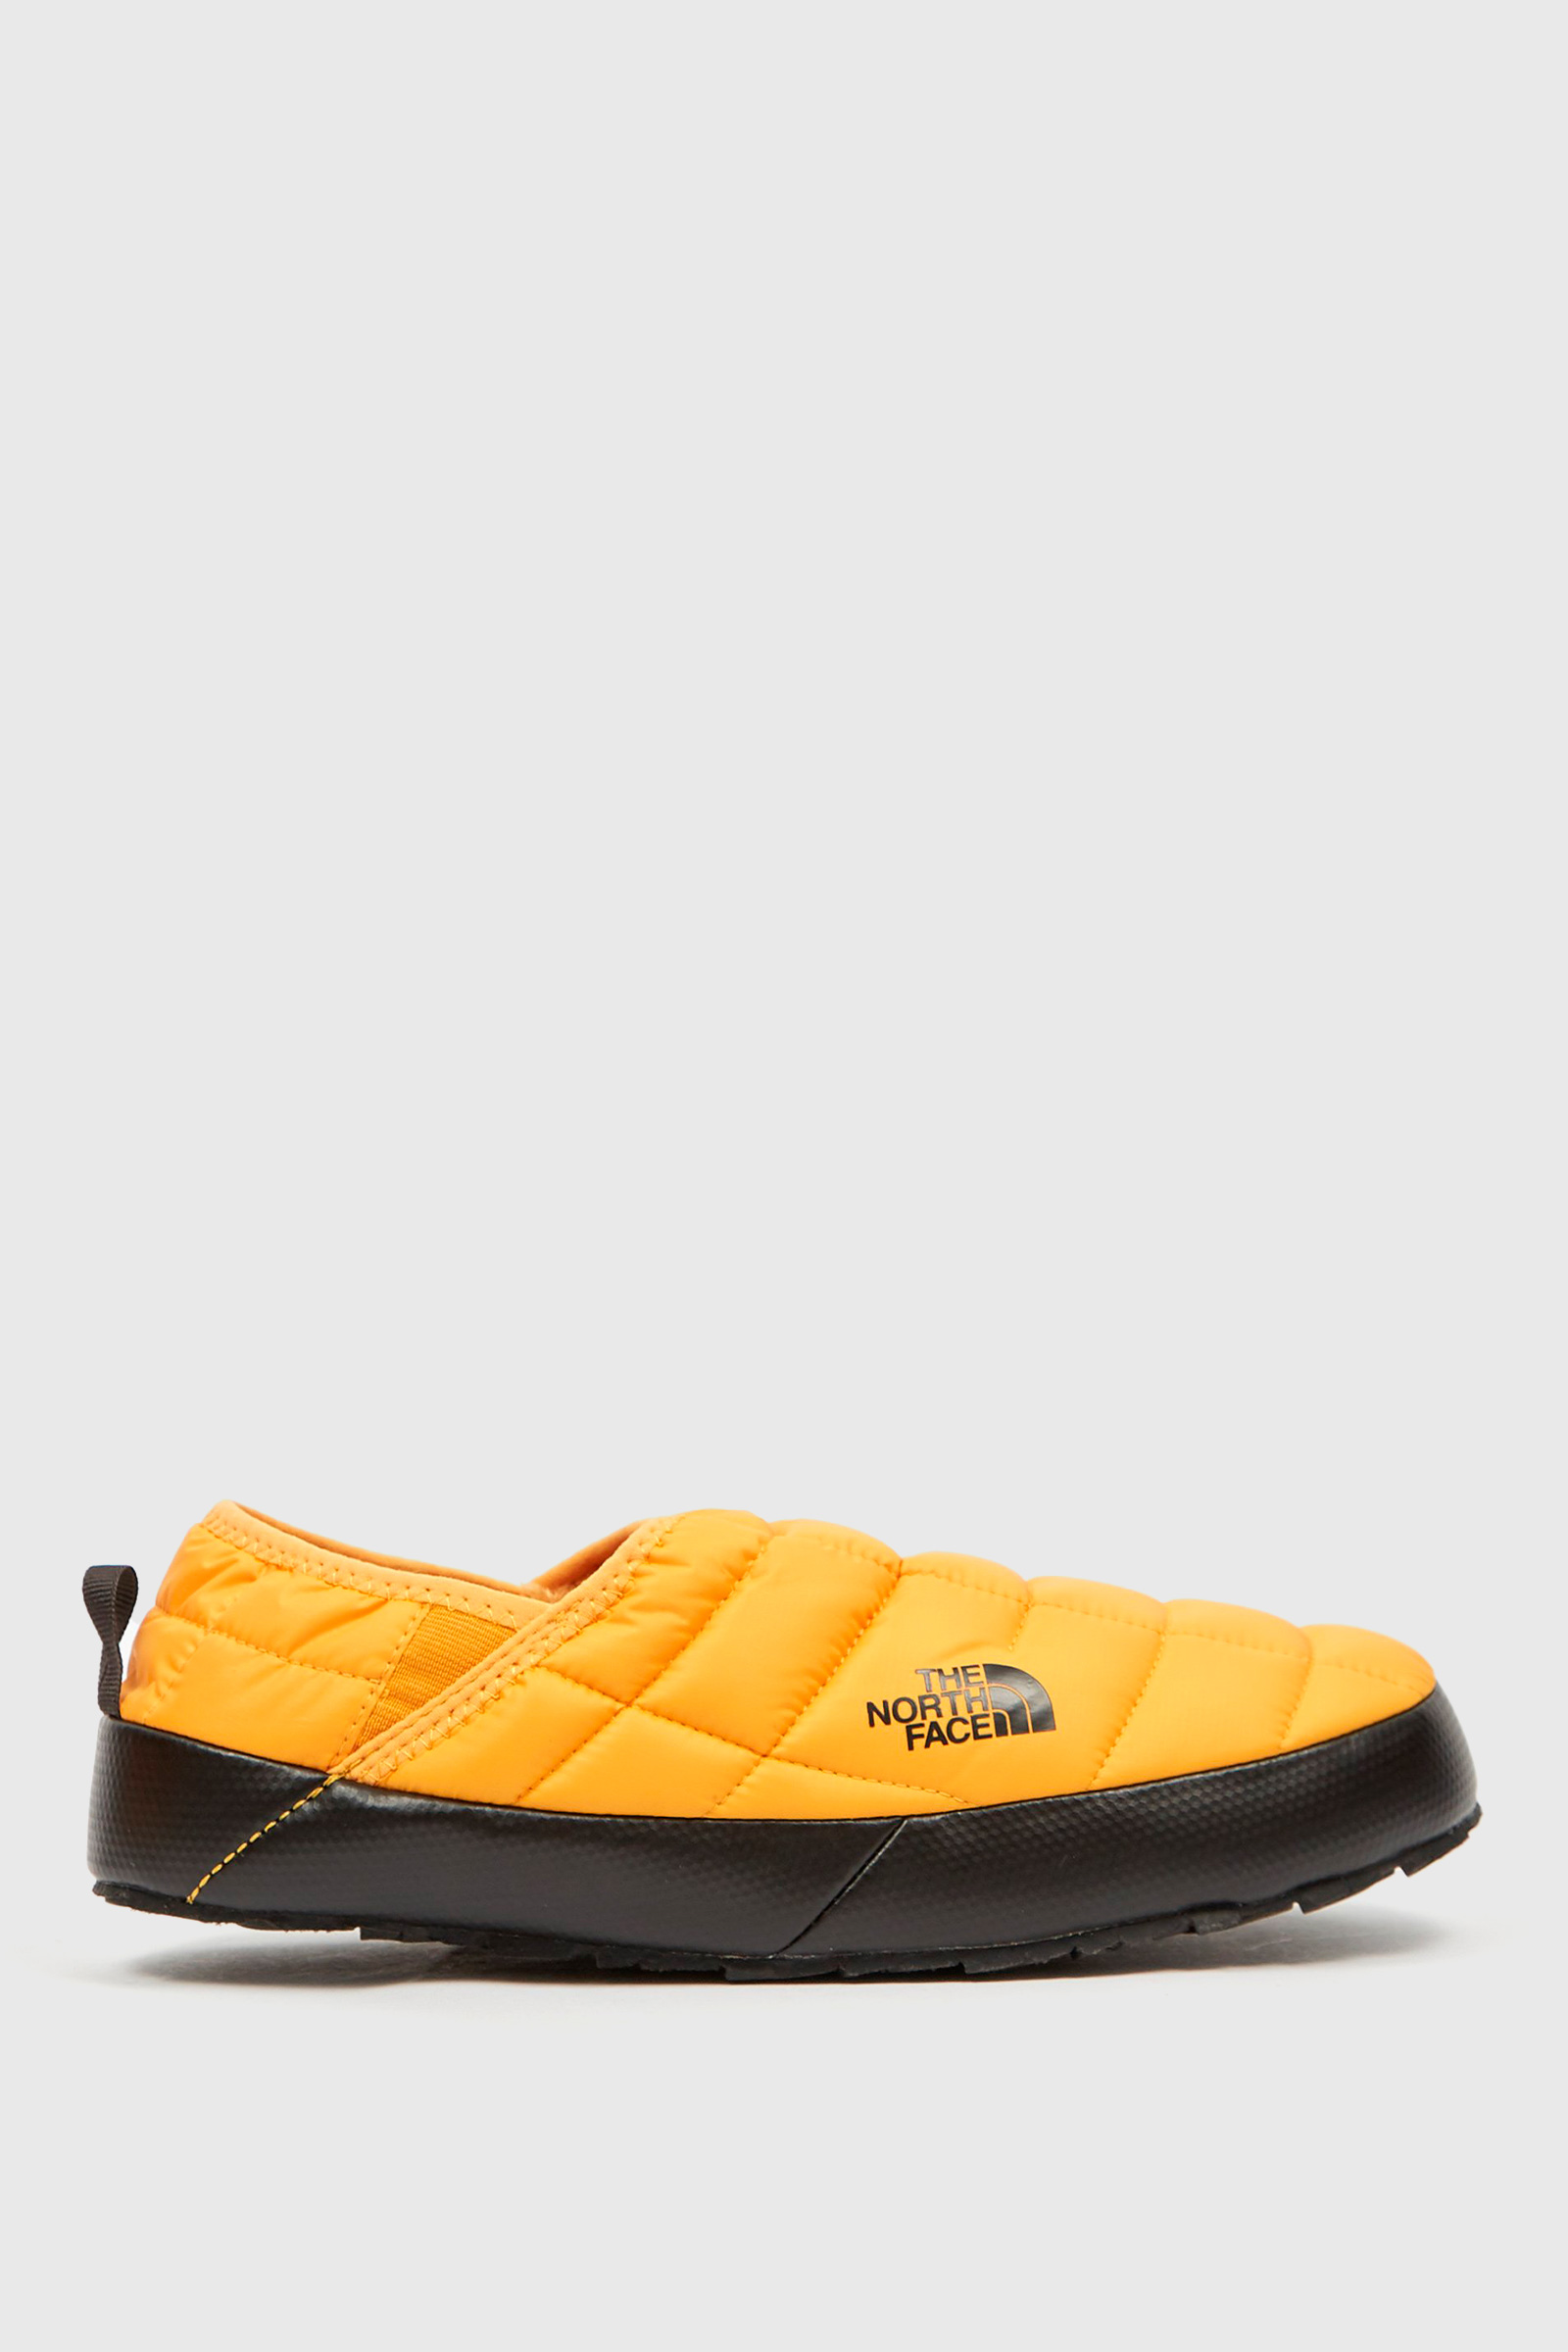 the north face traction mule